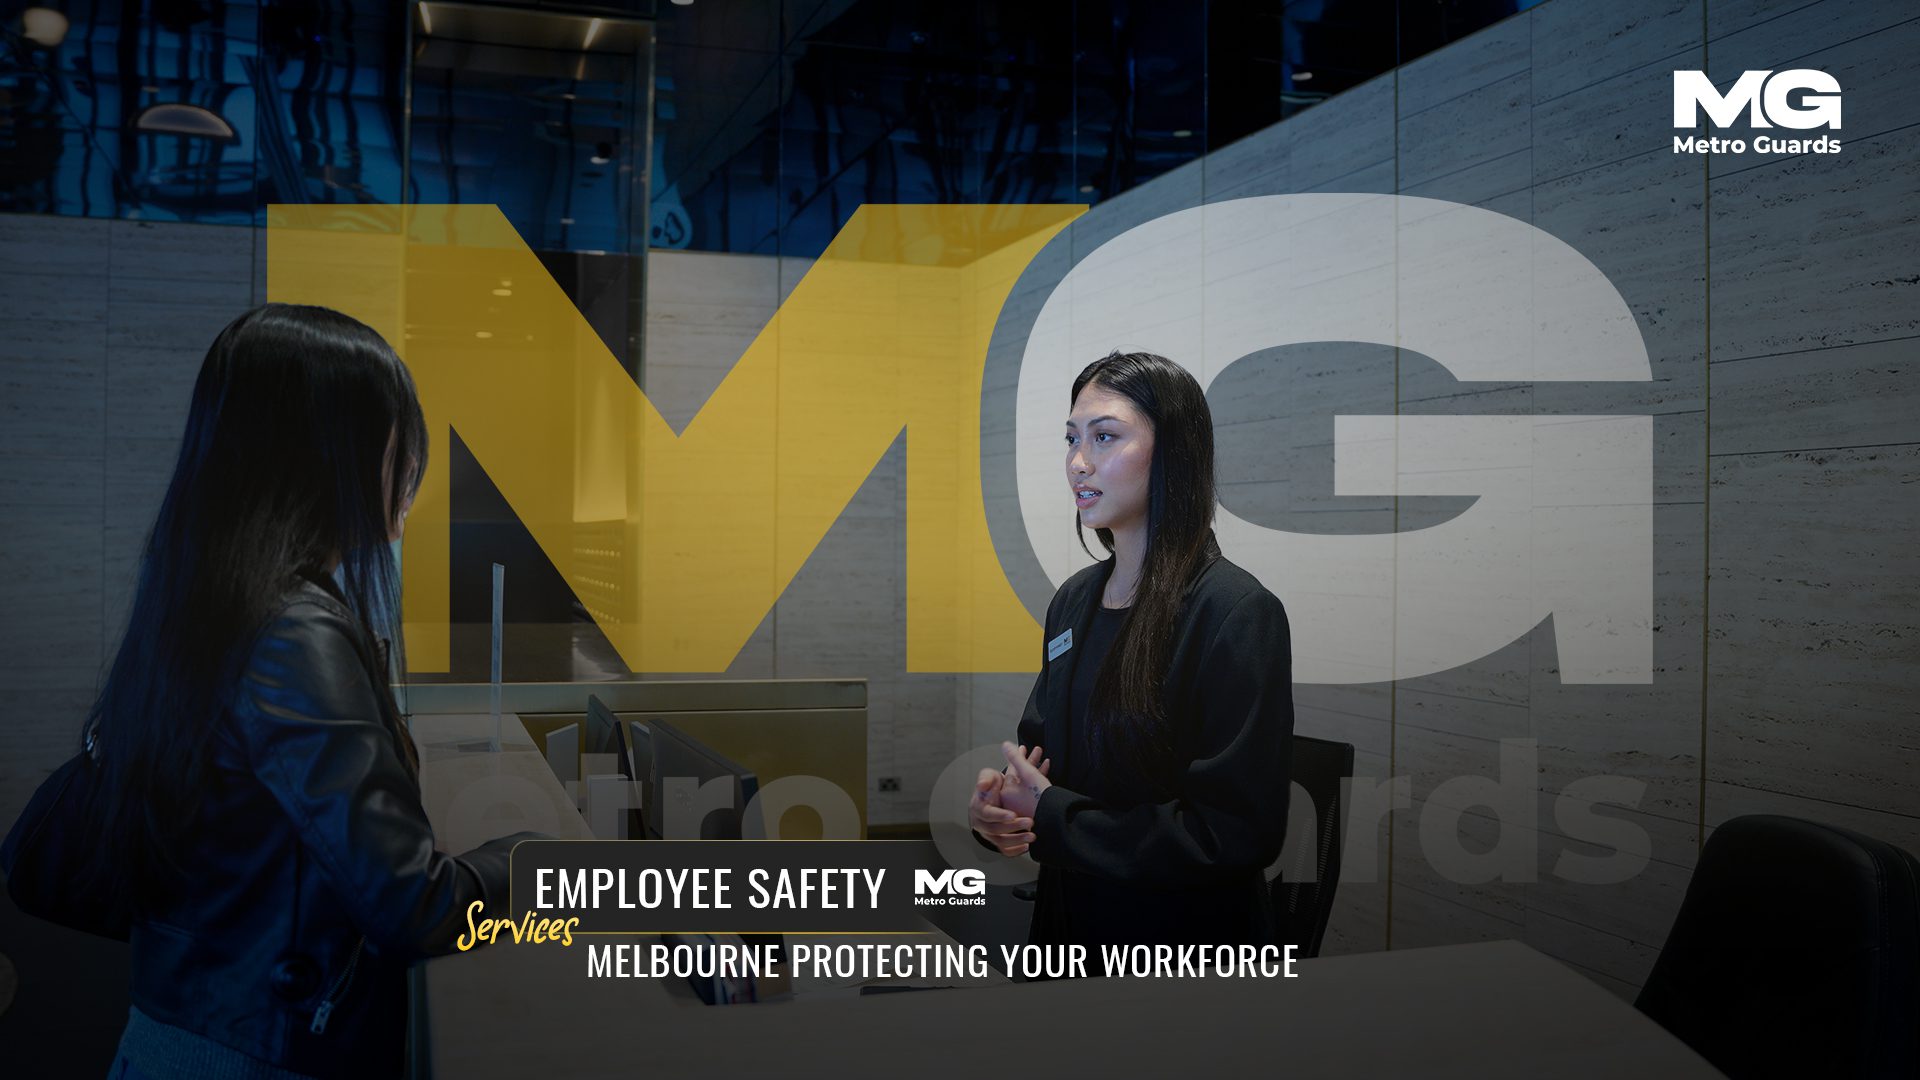 Employee Safety Services Melbourne: Protecting Your Workforce